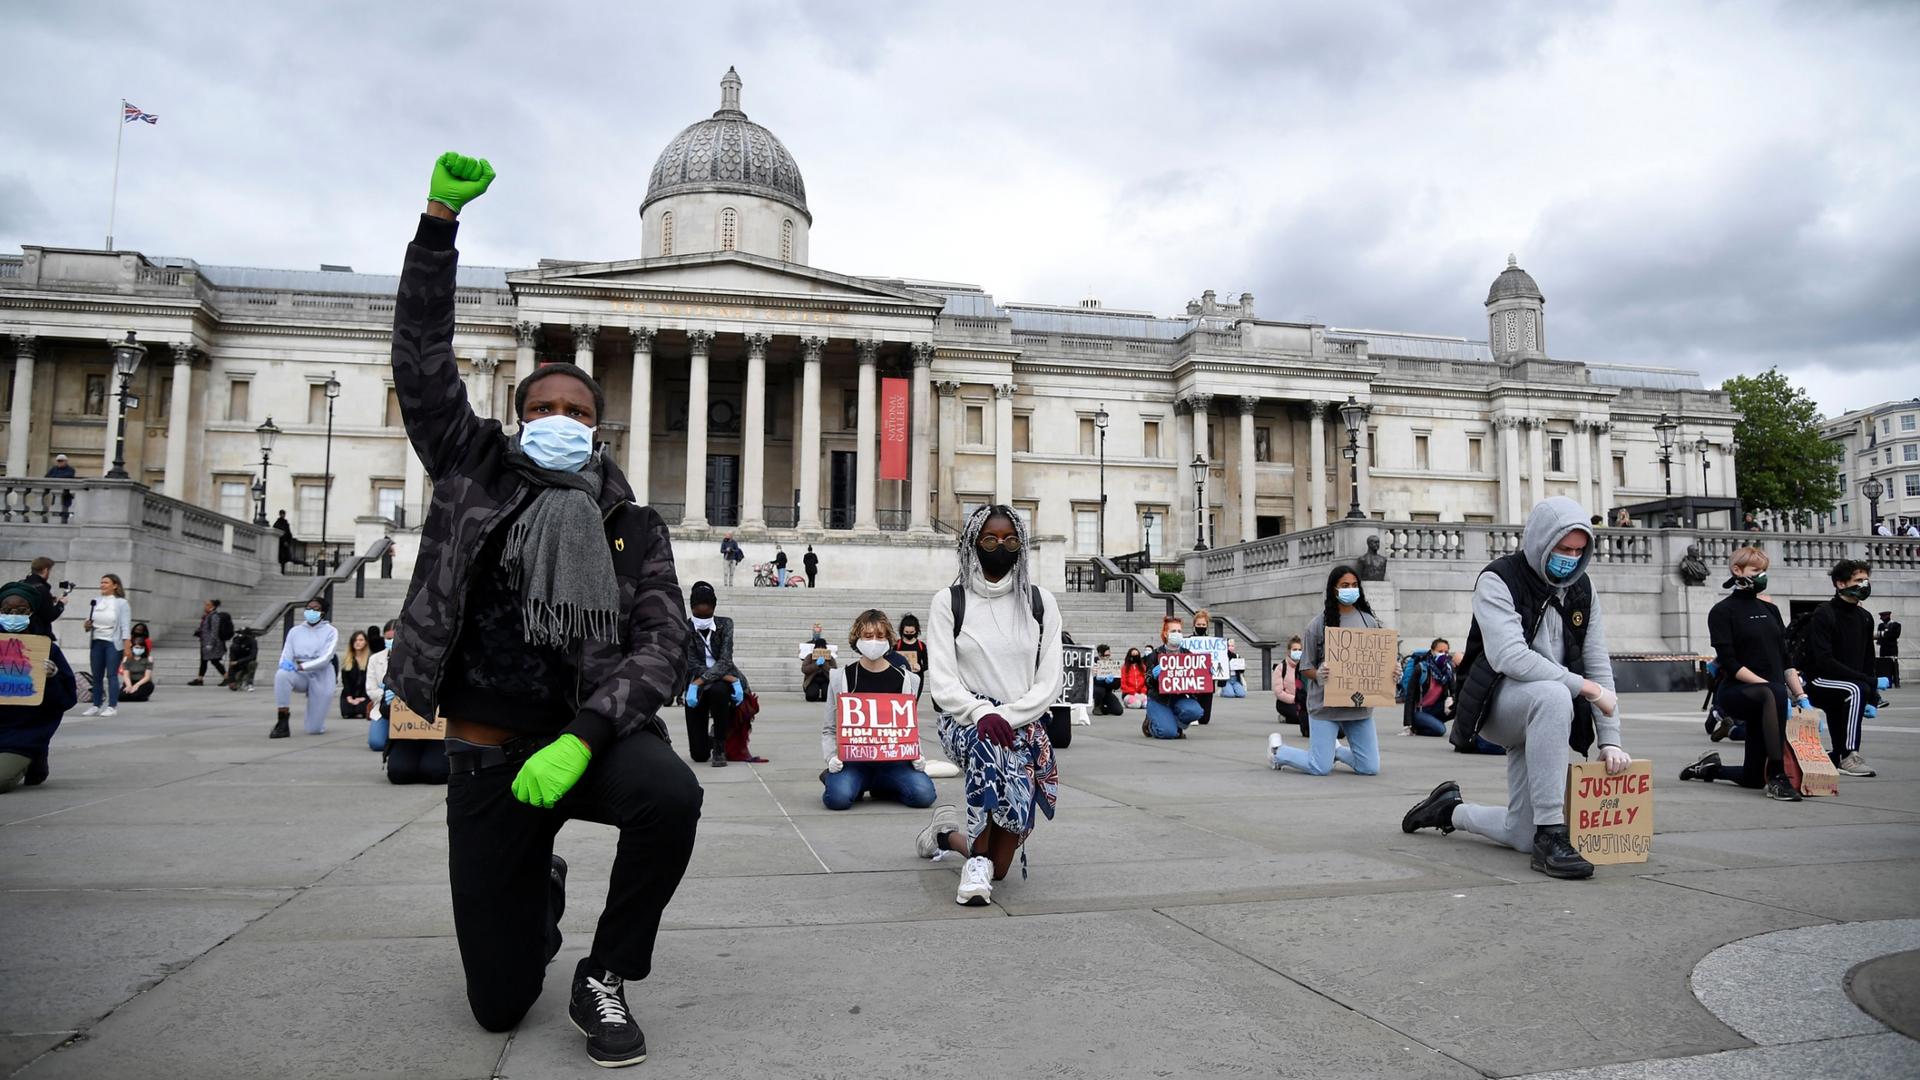 A large group of people are shown kneeling while spaced apart from each other in Trafalgar Square.